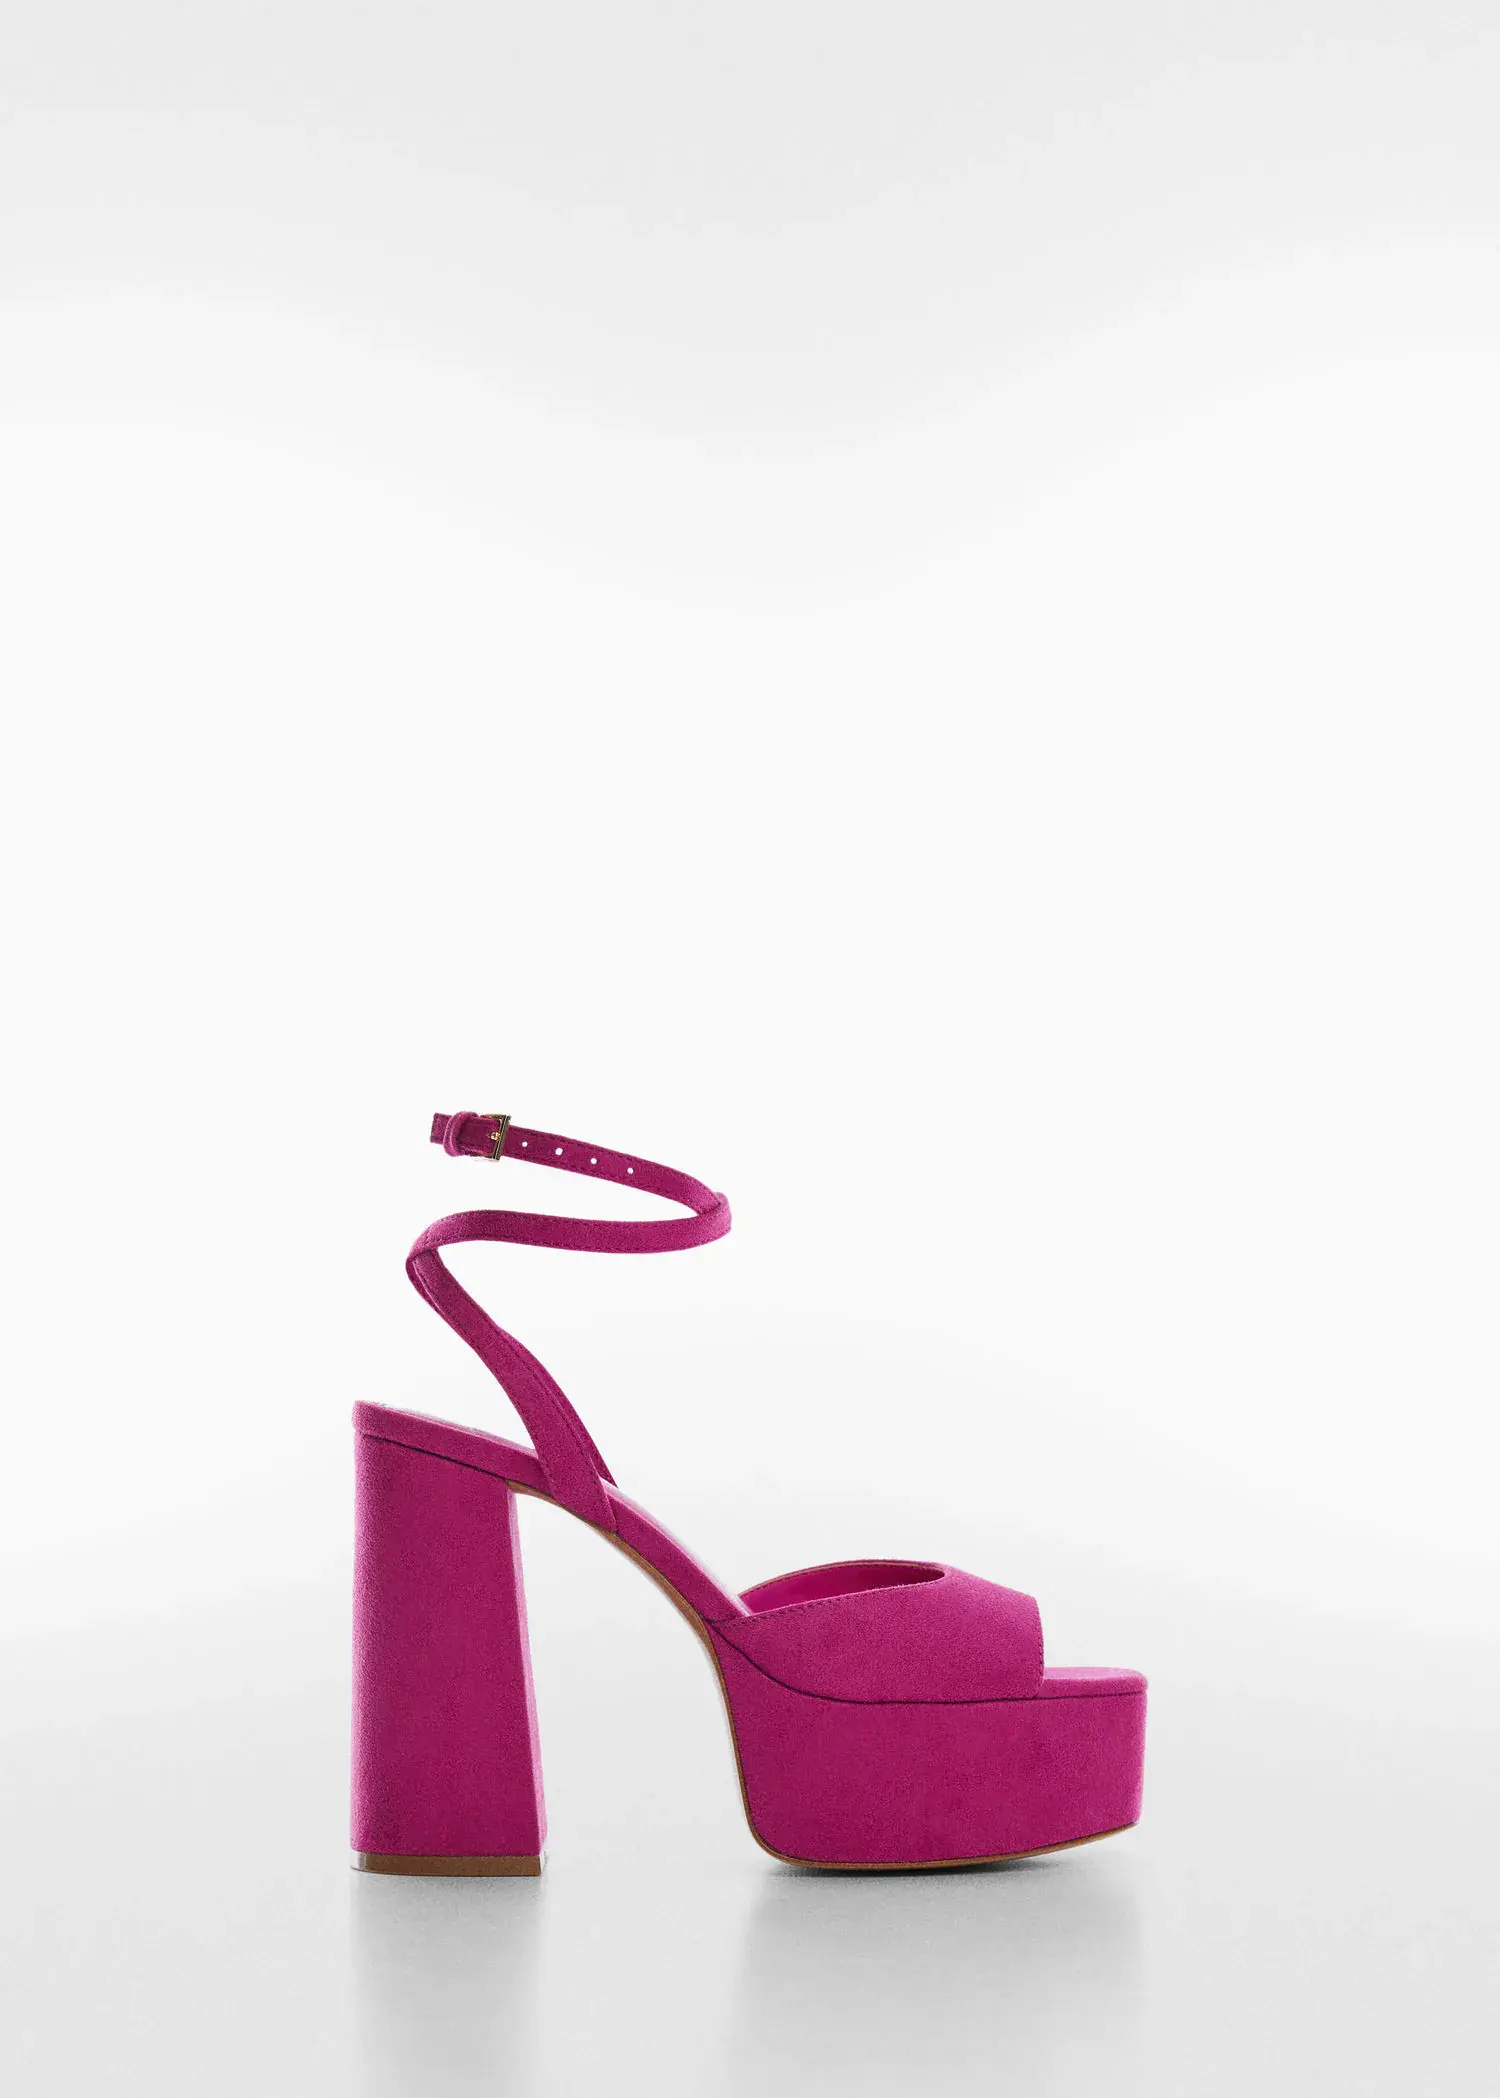 Mango Platform ankle-cuff sandals. a pair of pink high heel shoes on a white background. 